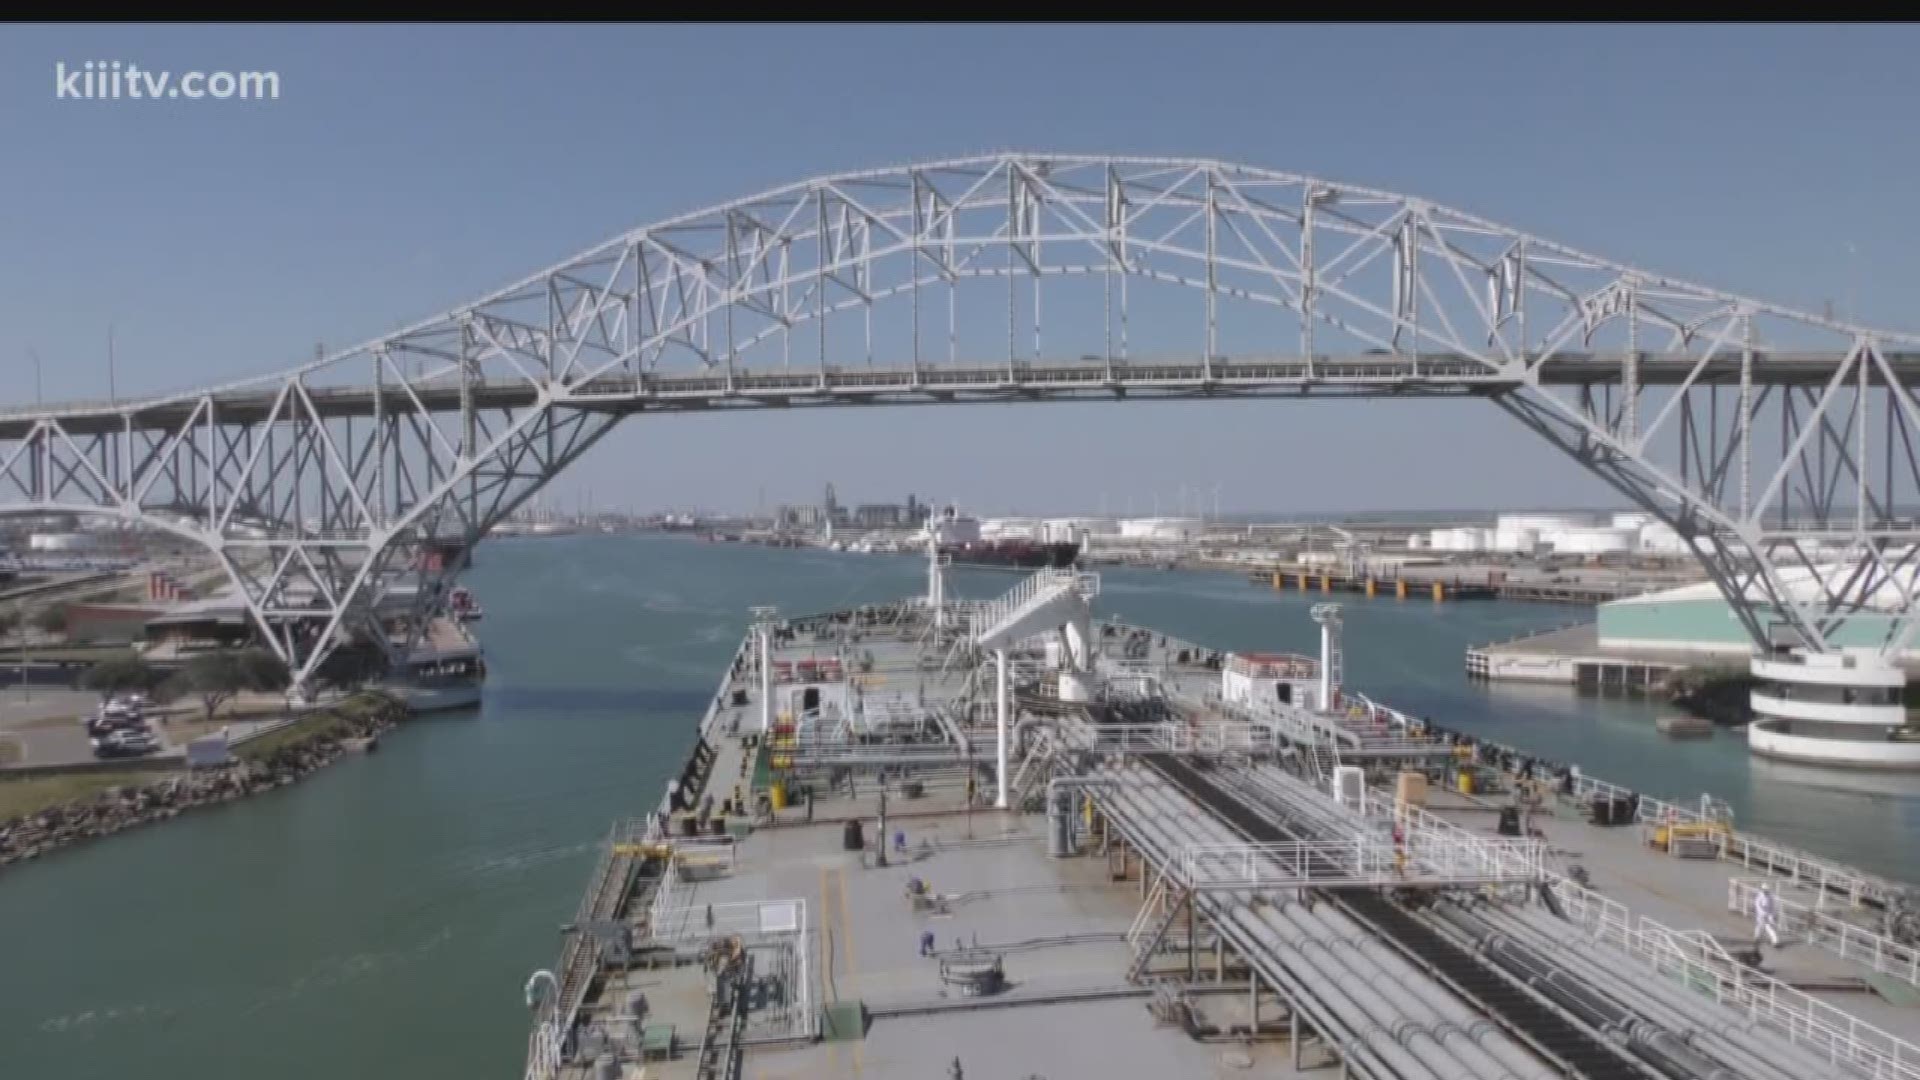 The Port of Corpus Christi is about to begin the 32-mile dredging project to deepen and widen the access in and out of the ship channel.